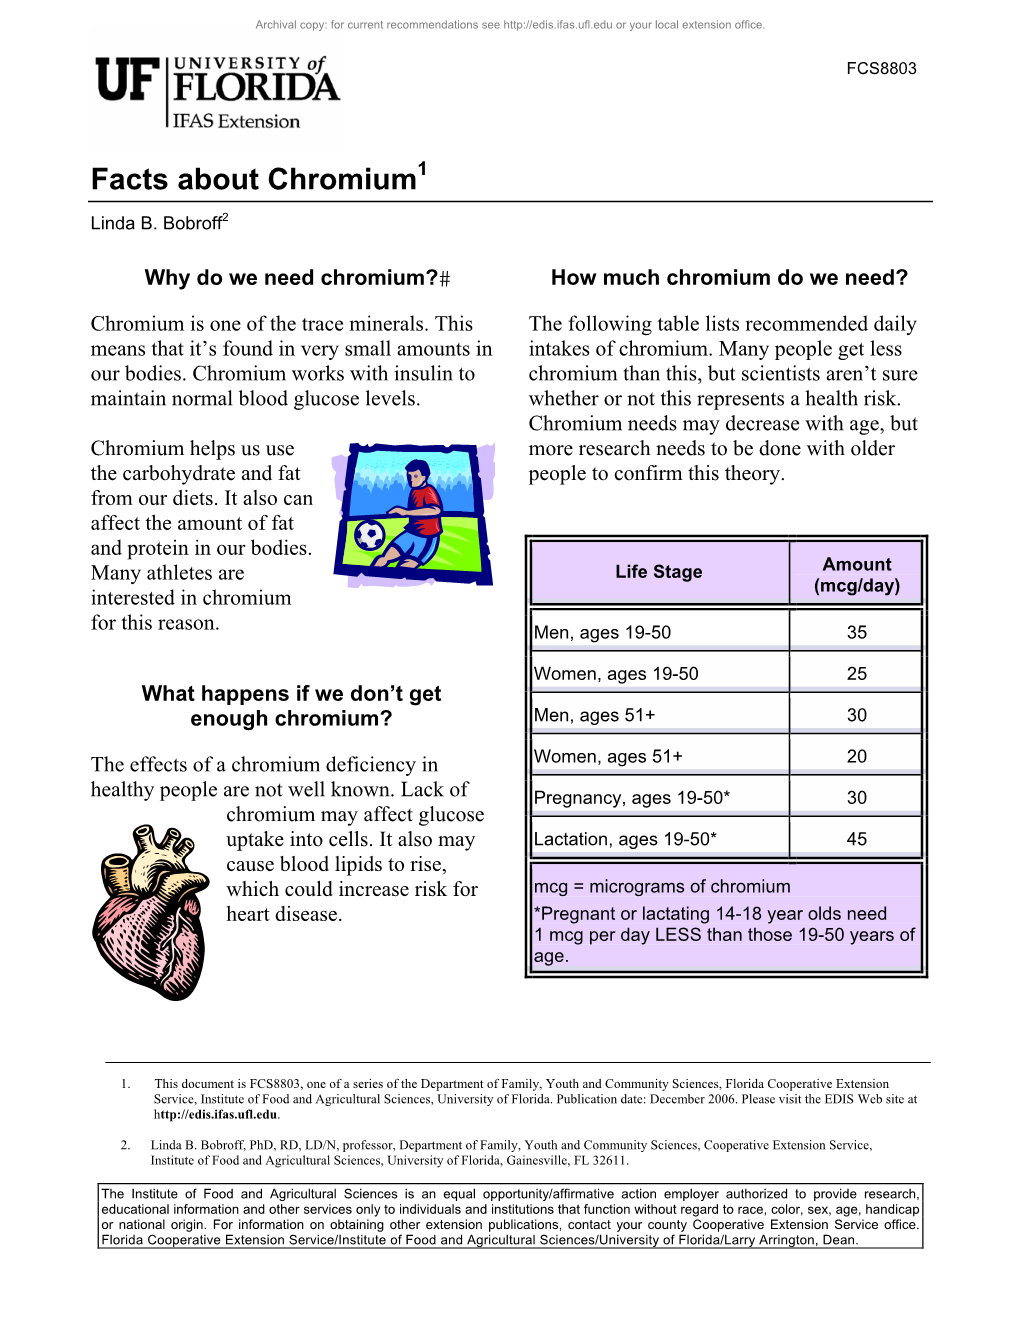 Facts About Chromium1